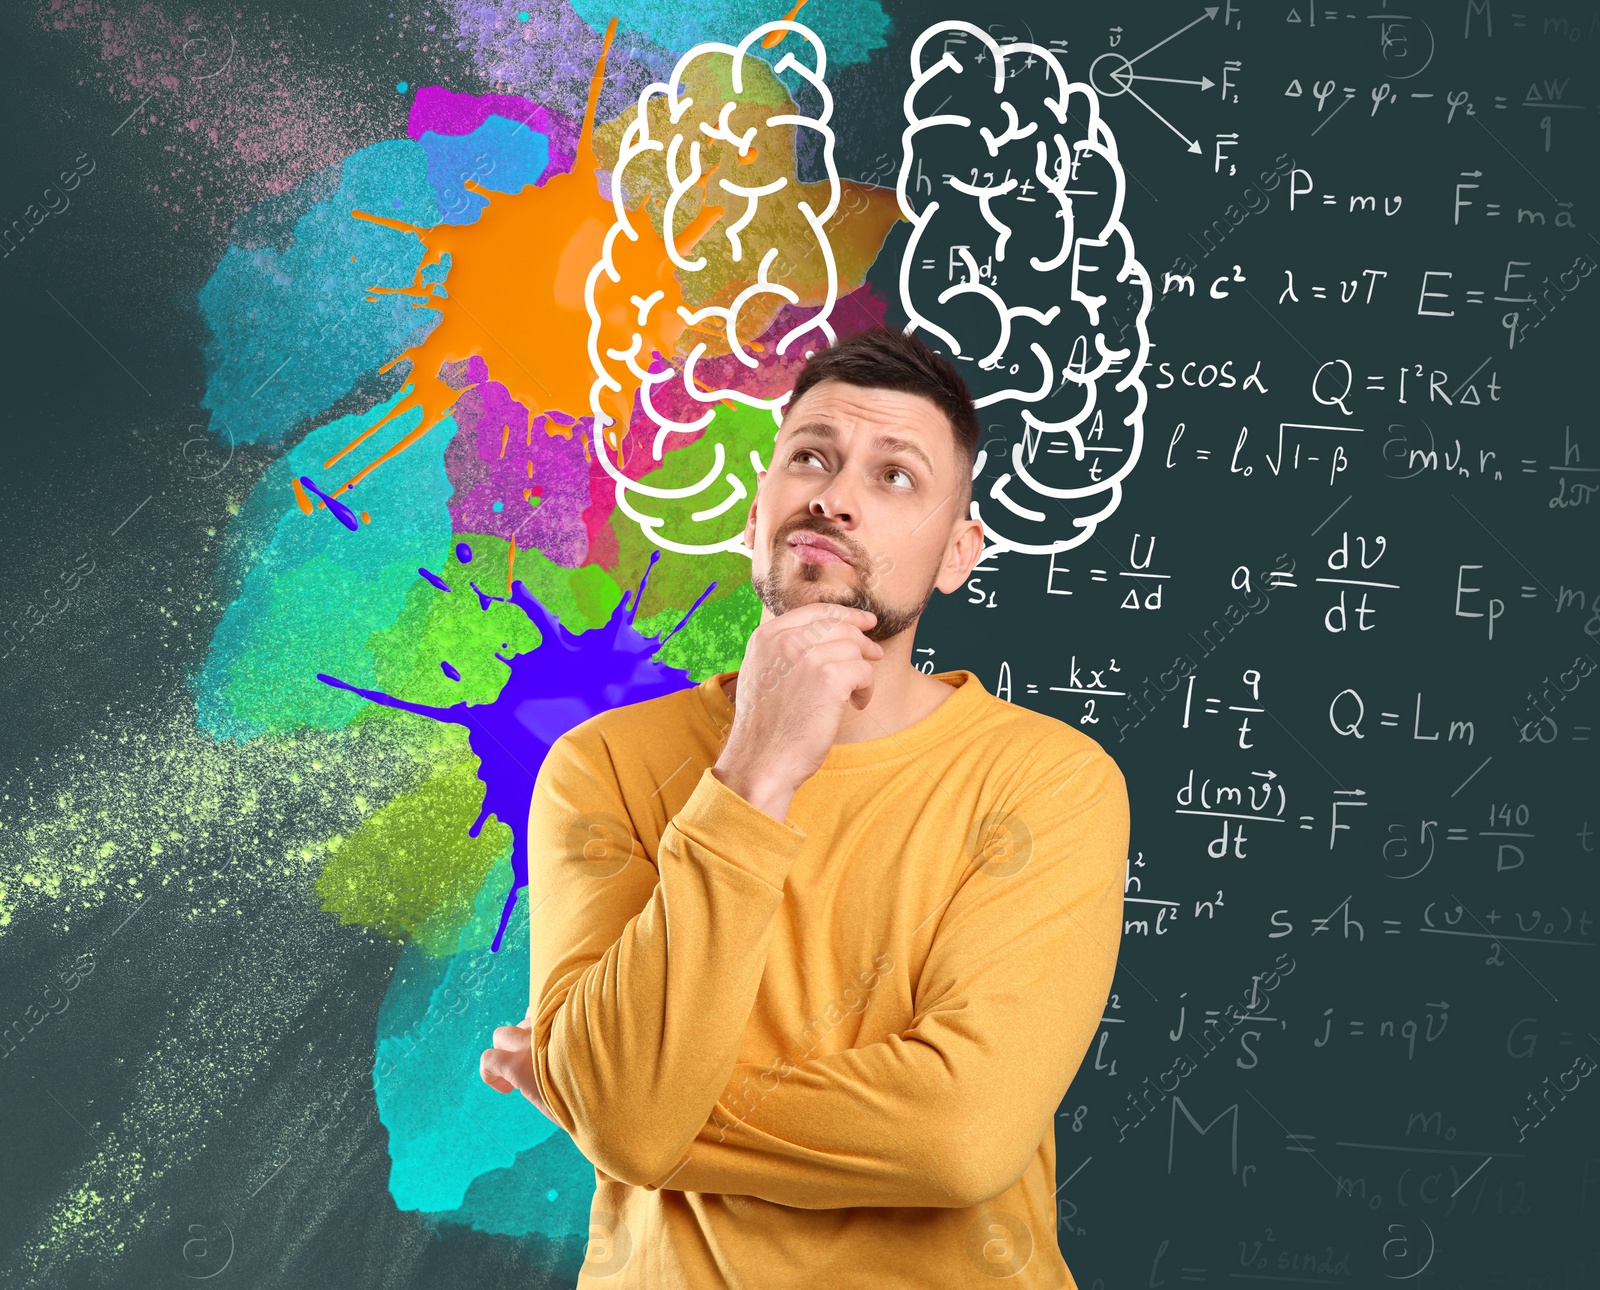 Image of Logic and creativity. Man and illustration of brain hemispheres. Different formulas and bright paint stains on chalkboard